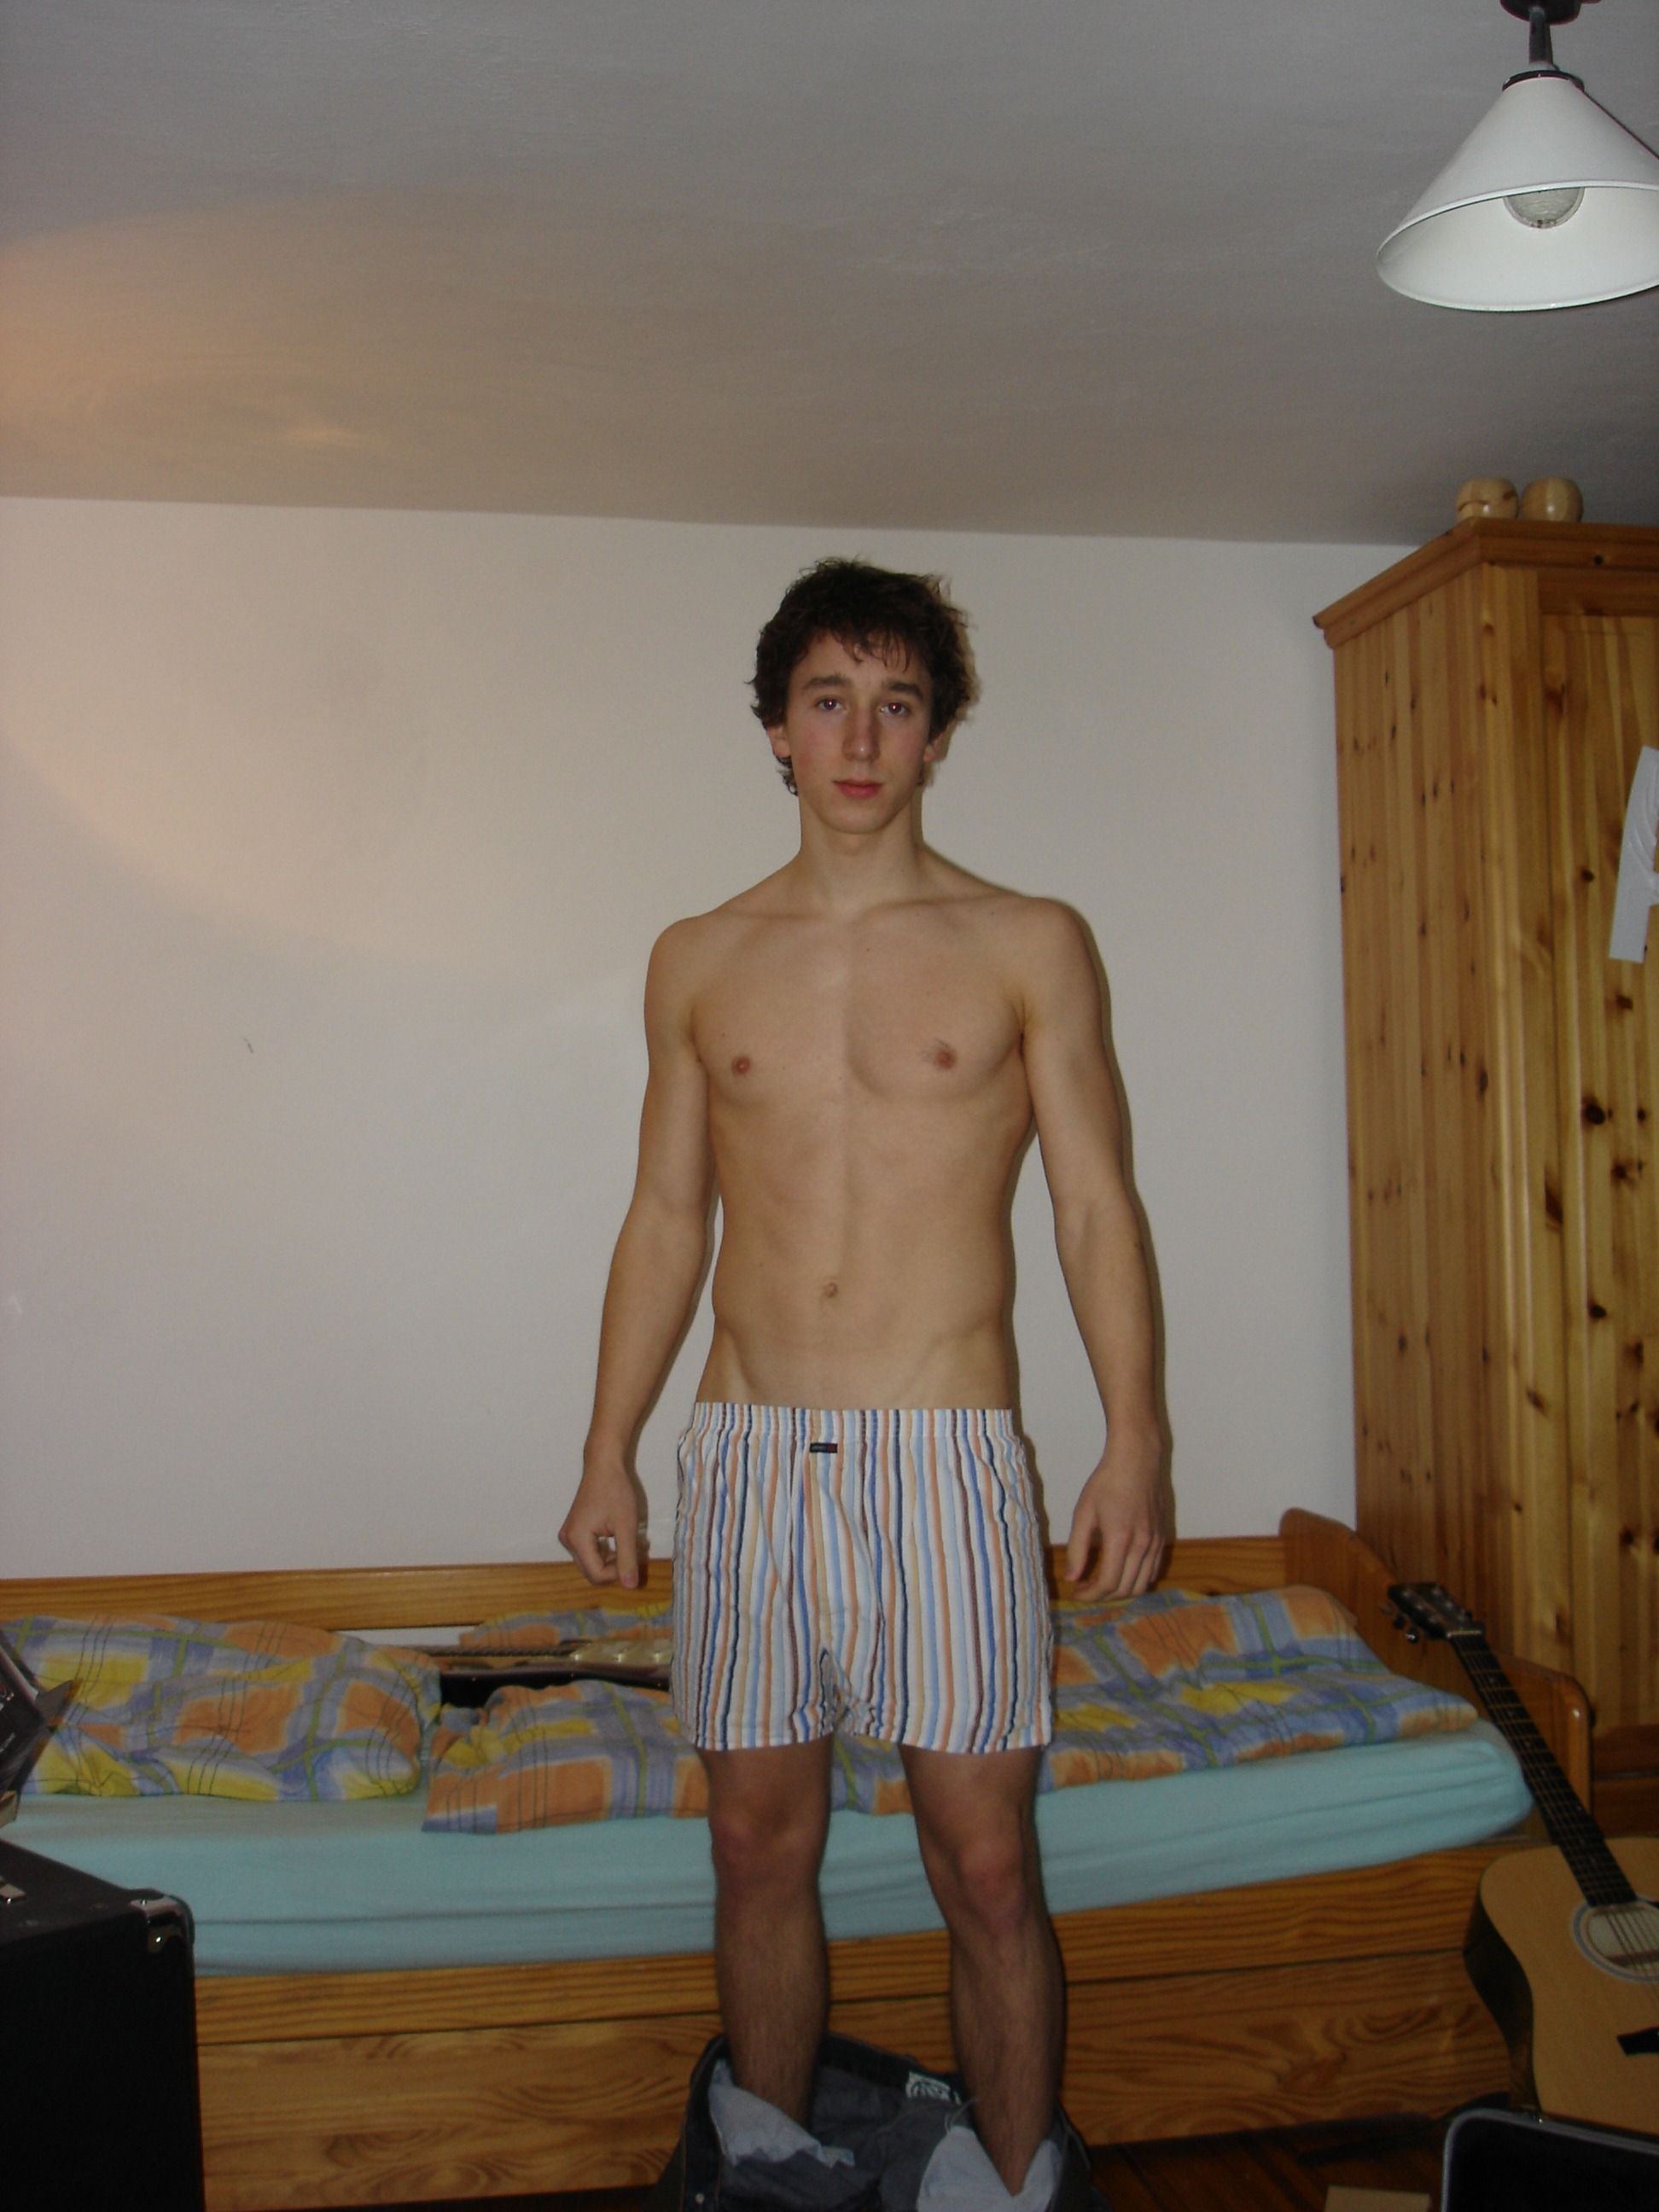 The S. reccomend Young male naked amateur